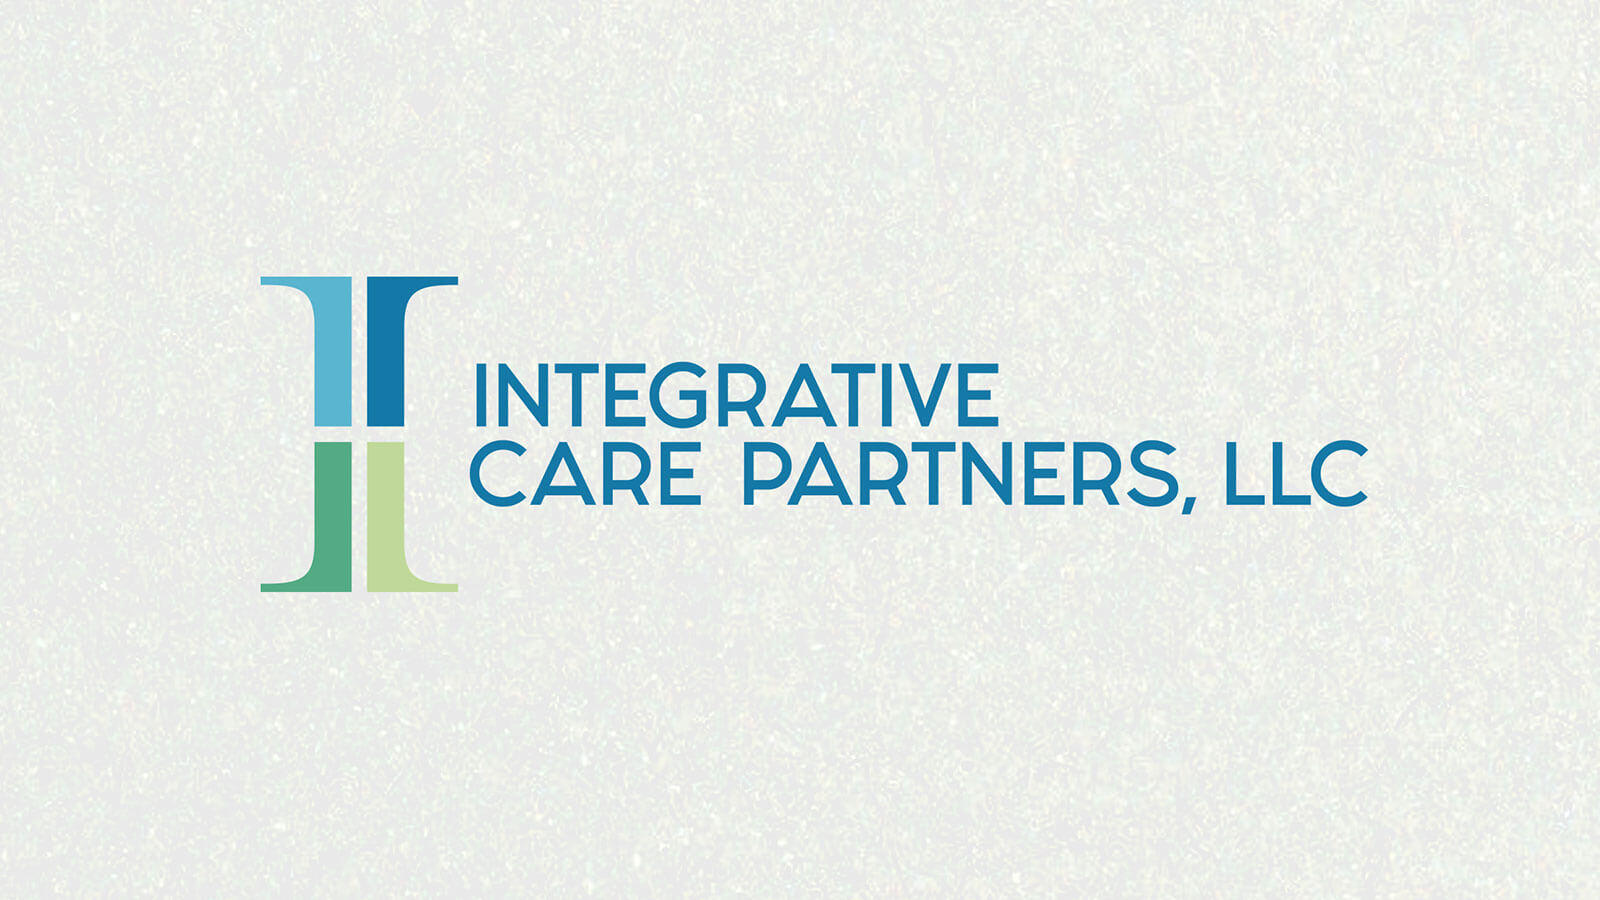 Integrative Care Partners, LLC (ICP) <strong>New Corporate Identity</strong>